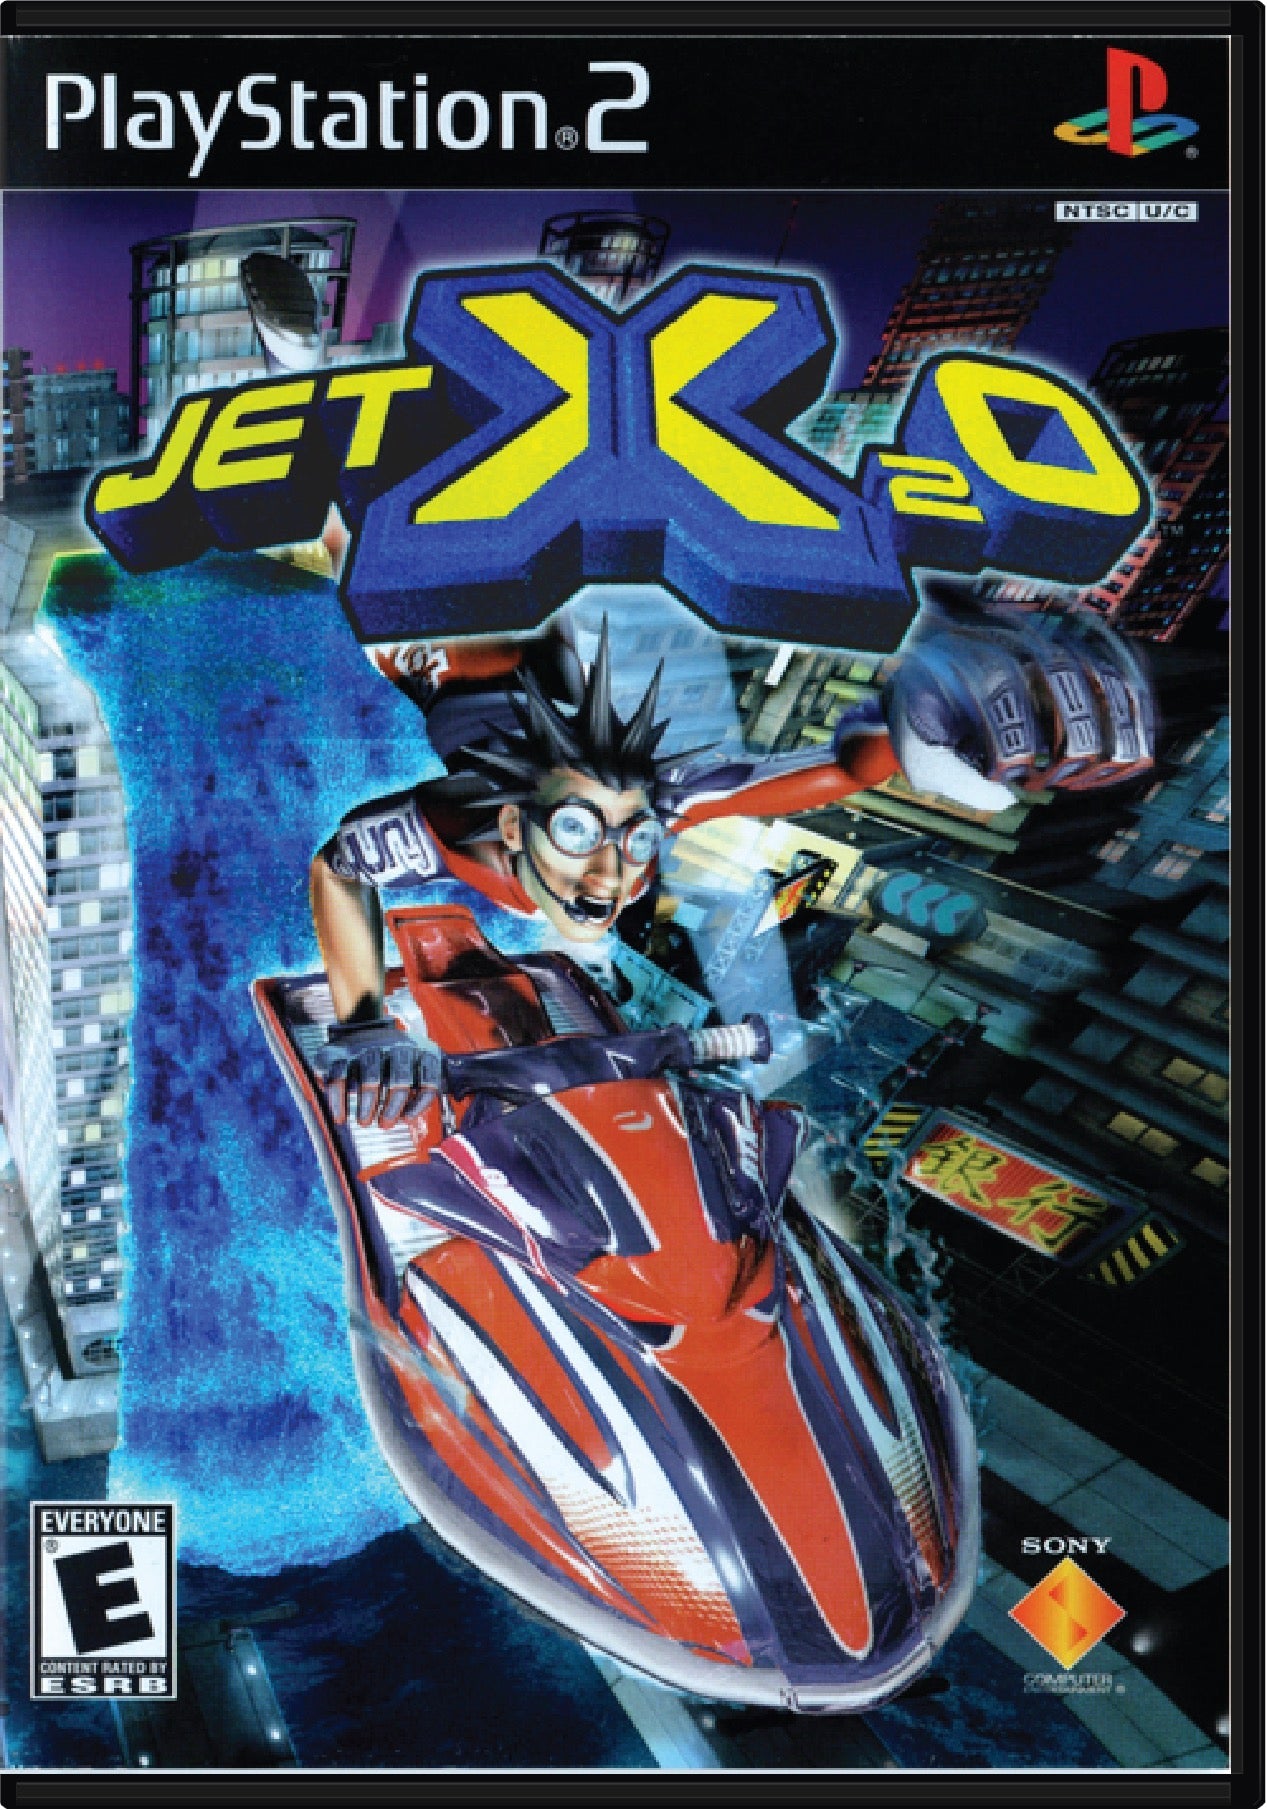 Jet X2O Cover Art and Product Photo